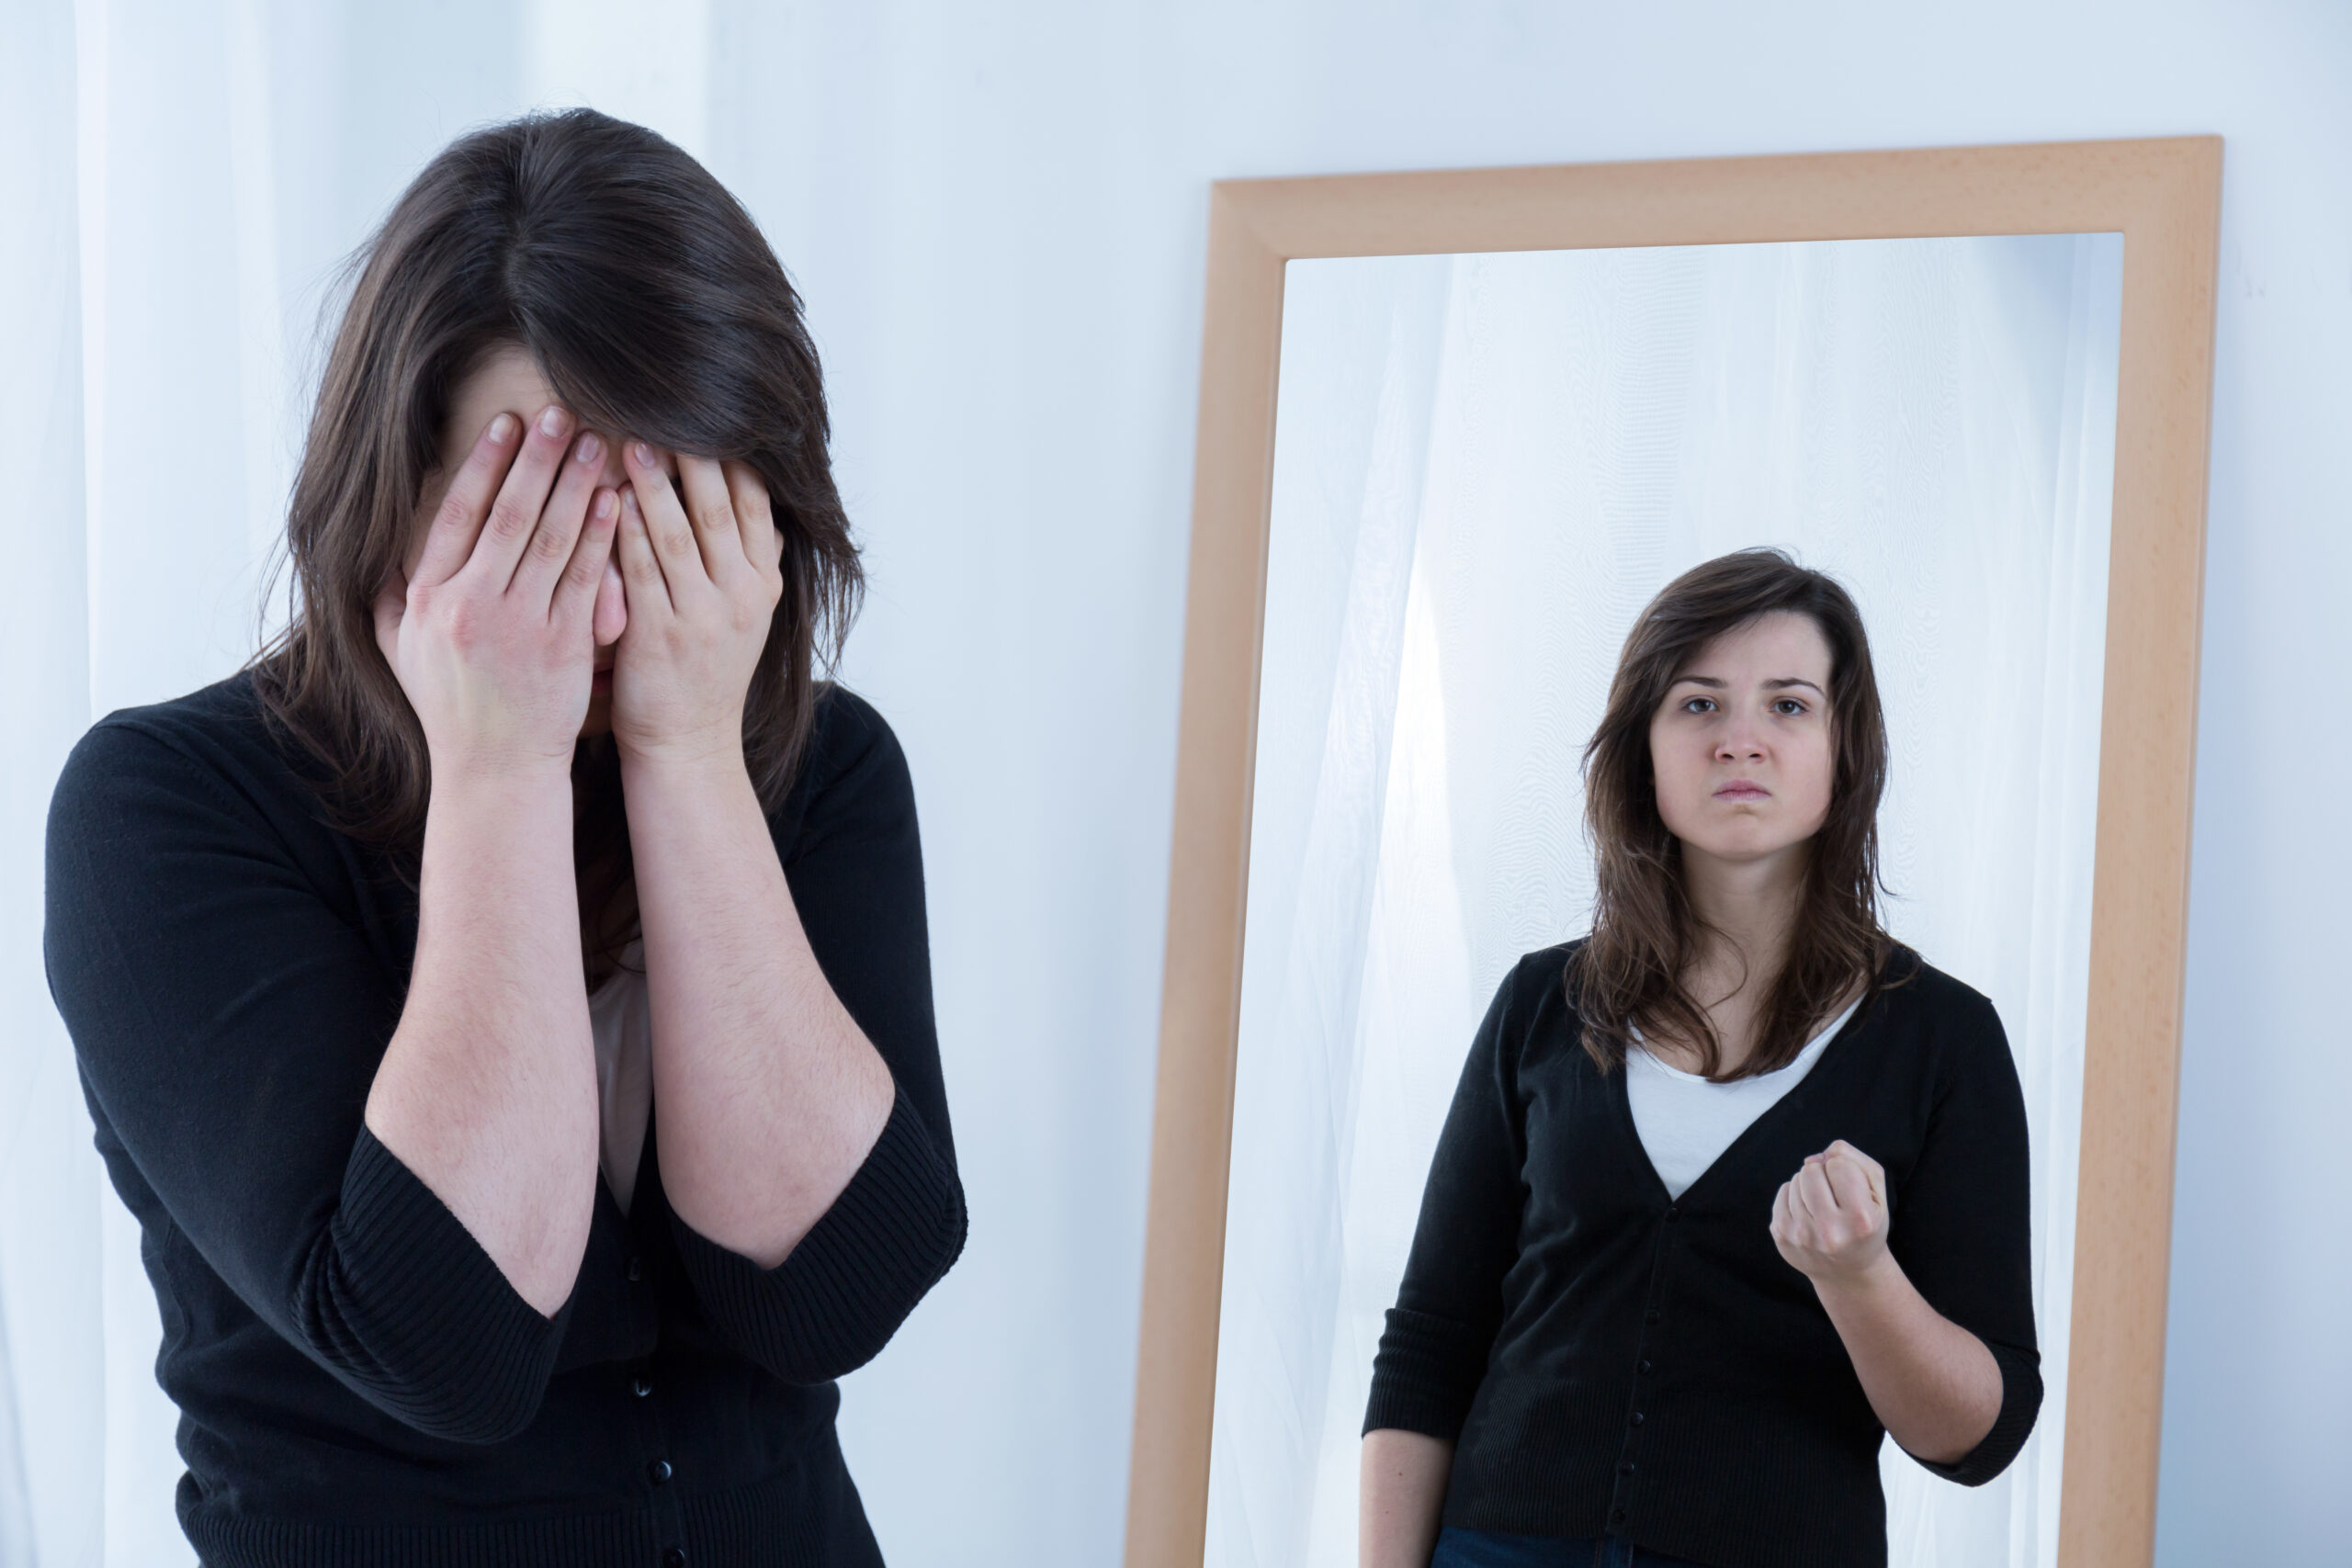 Woman and her true angry reflection in the mirror